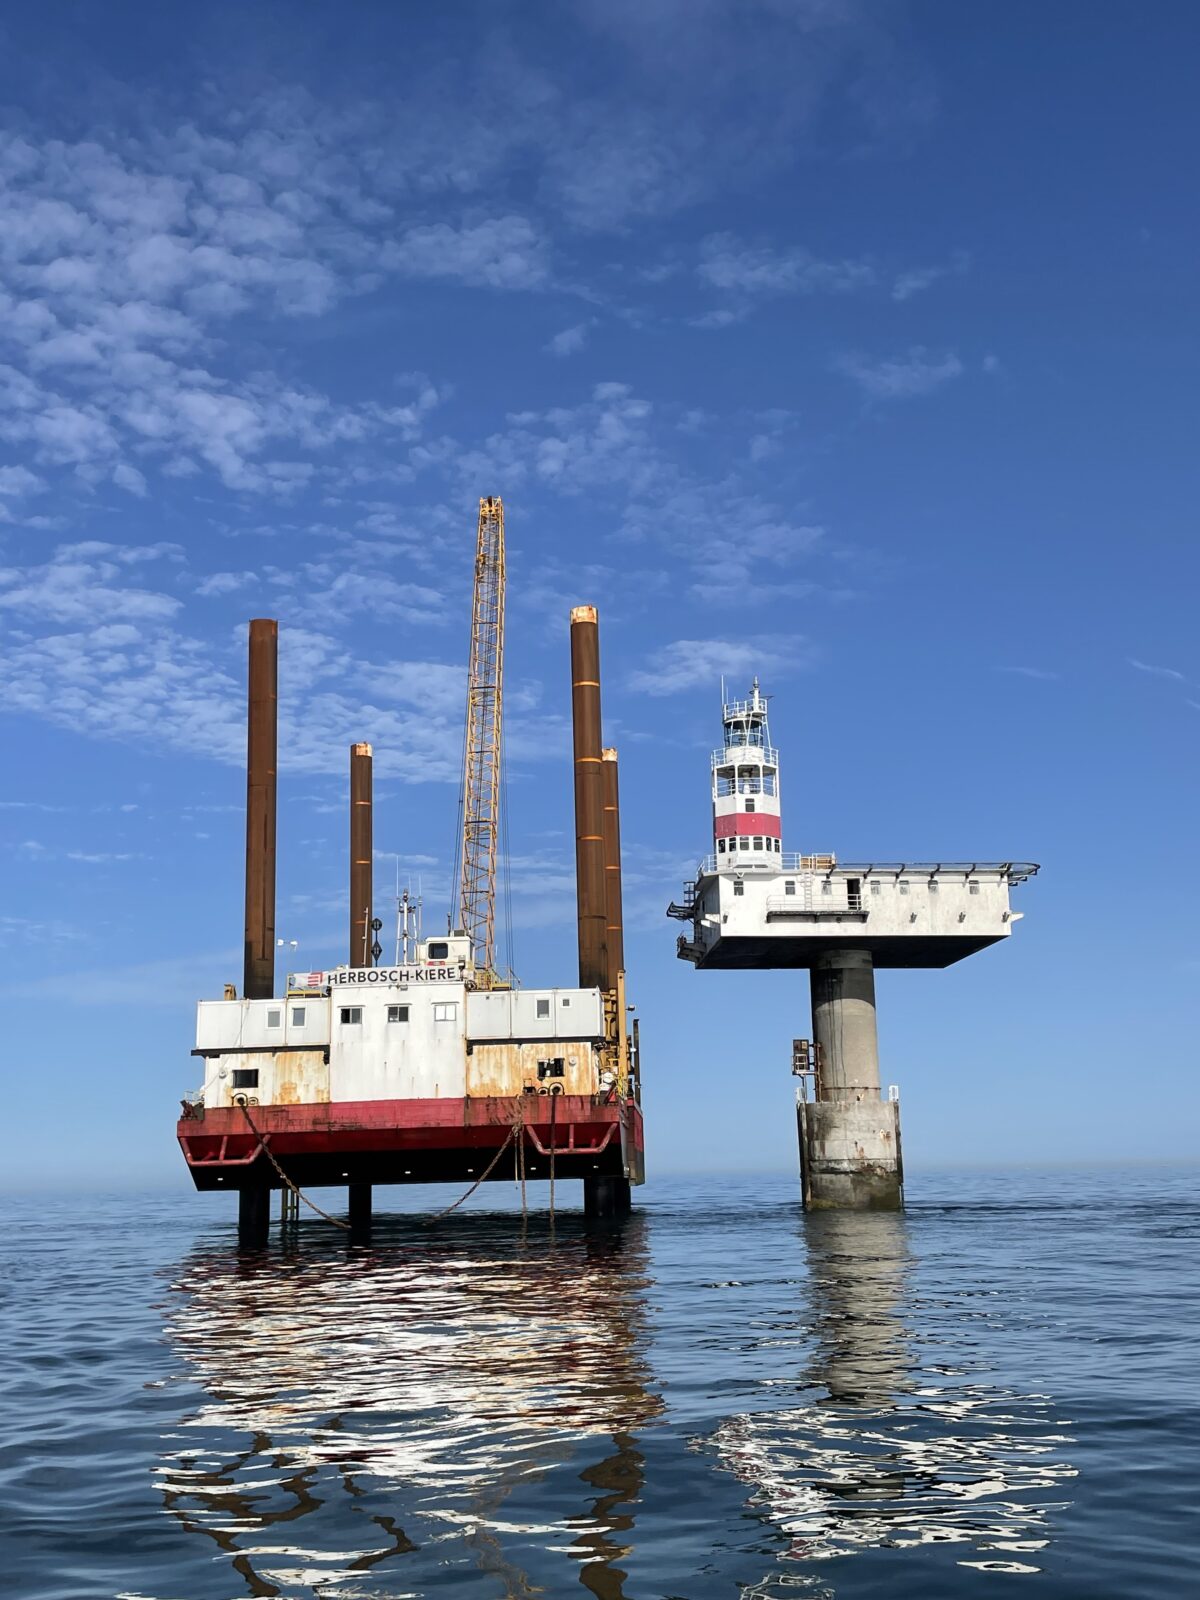 HAVEN SEACHALLENGER SUPPORTS HERBOSCH-KIERE FOR OPERATIONS AT ROYAL SOVEREIGN LIGHTHOUSE